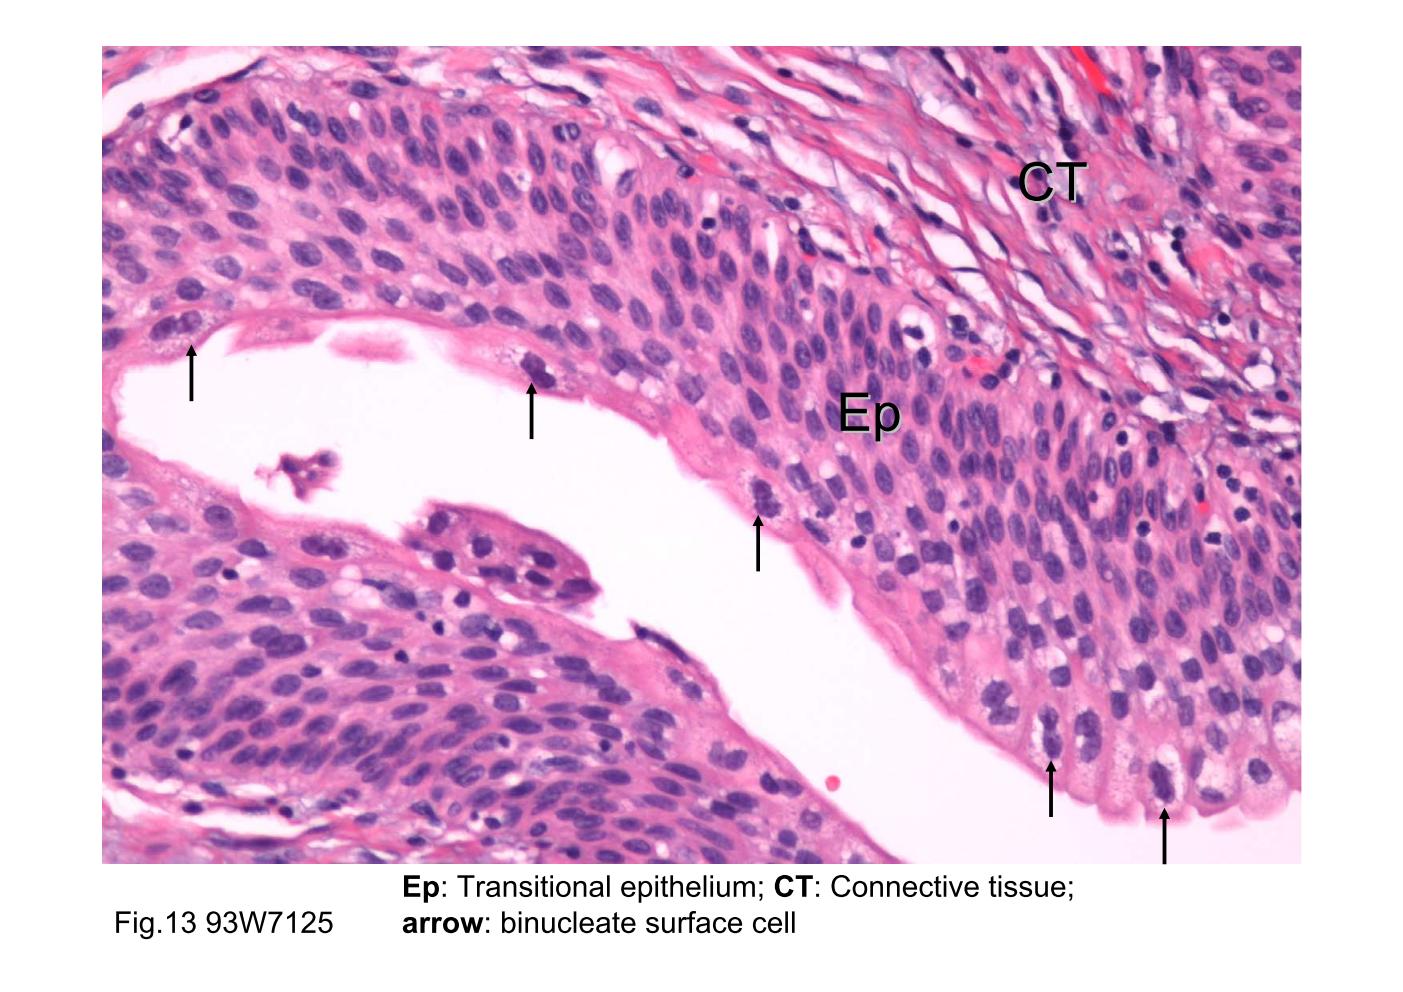 block8_23.jpg - Fig.13 The photomicrograph of ureter mucosa. Thetransitional epithelium (Ep) and its supporting connectivetissue (CT) constitute the mucosa. The surface cells of thetransitional epithelium exhibit a rounded or dome-shapedprofile, and some are binucleate (arrow). The basal cells arethe smallest. The intermediate cells appear to consist ofseveral layers and are composed of cells larger in size thanthe basal cells but smaller than the surface cells.